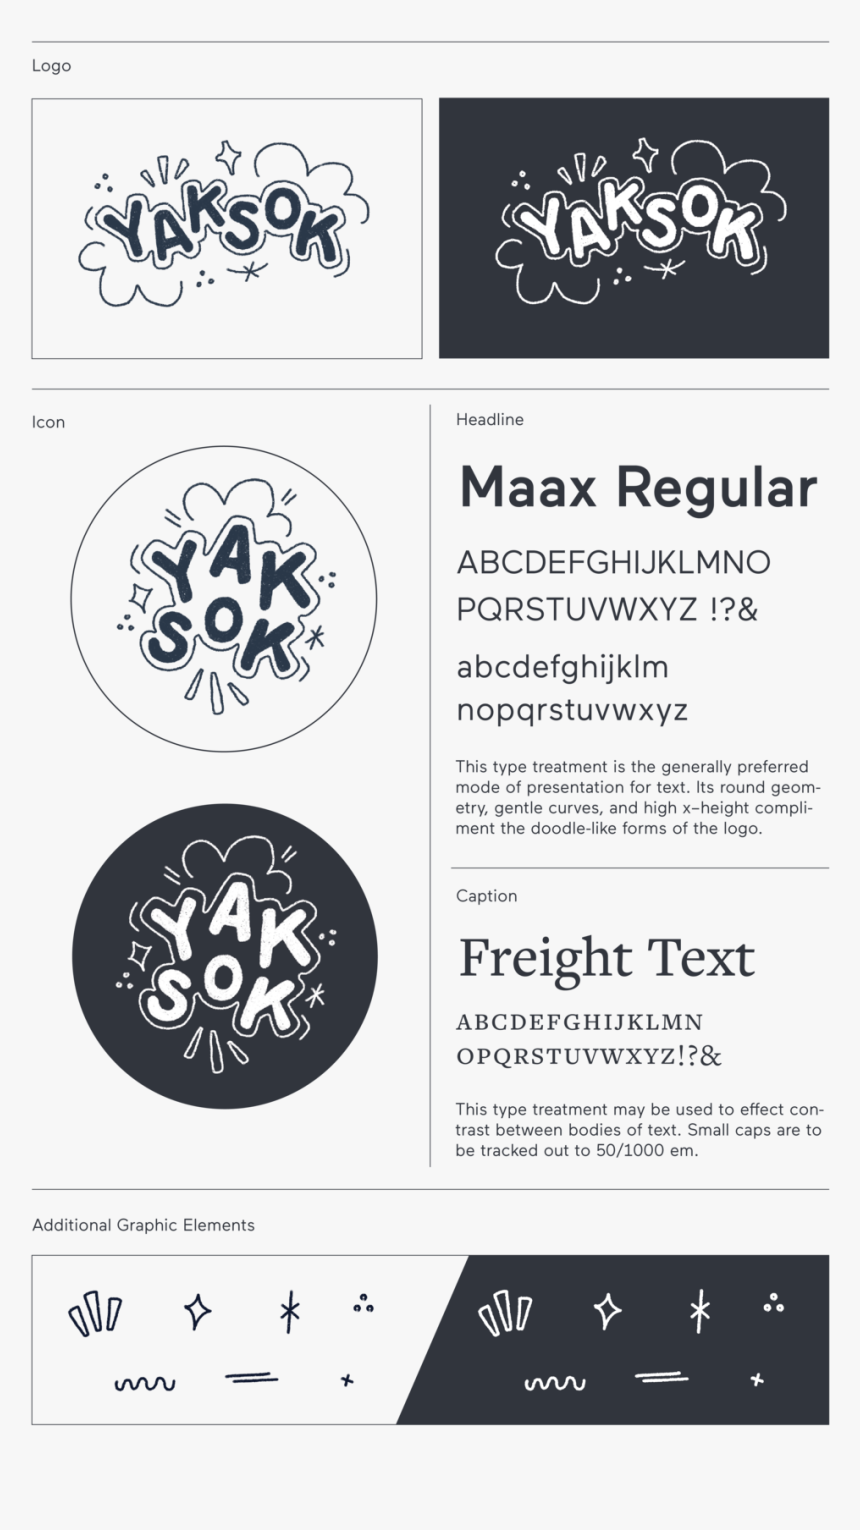 Yaksok Brand Guidelines - Circle, HD Png Download, Free Download